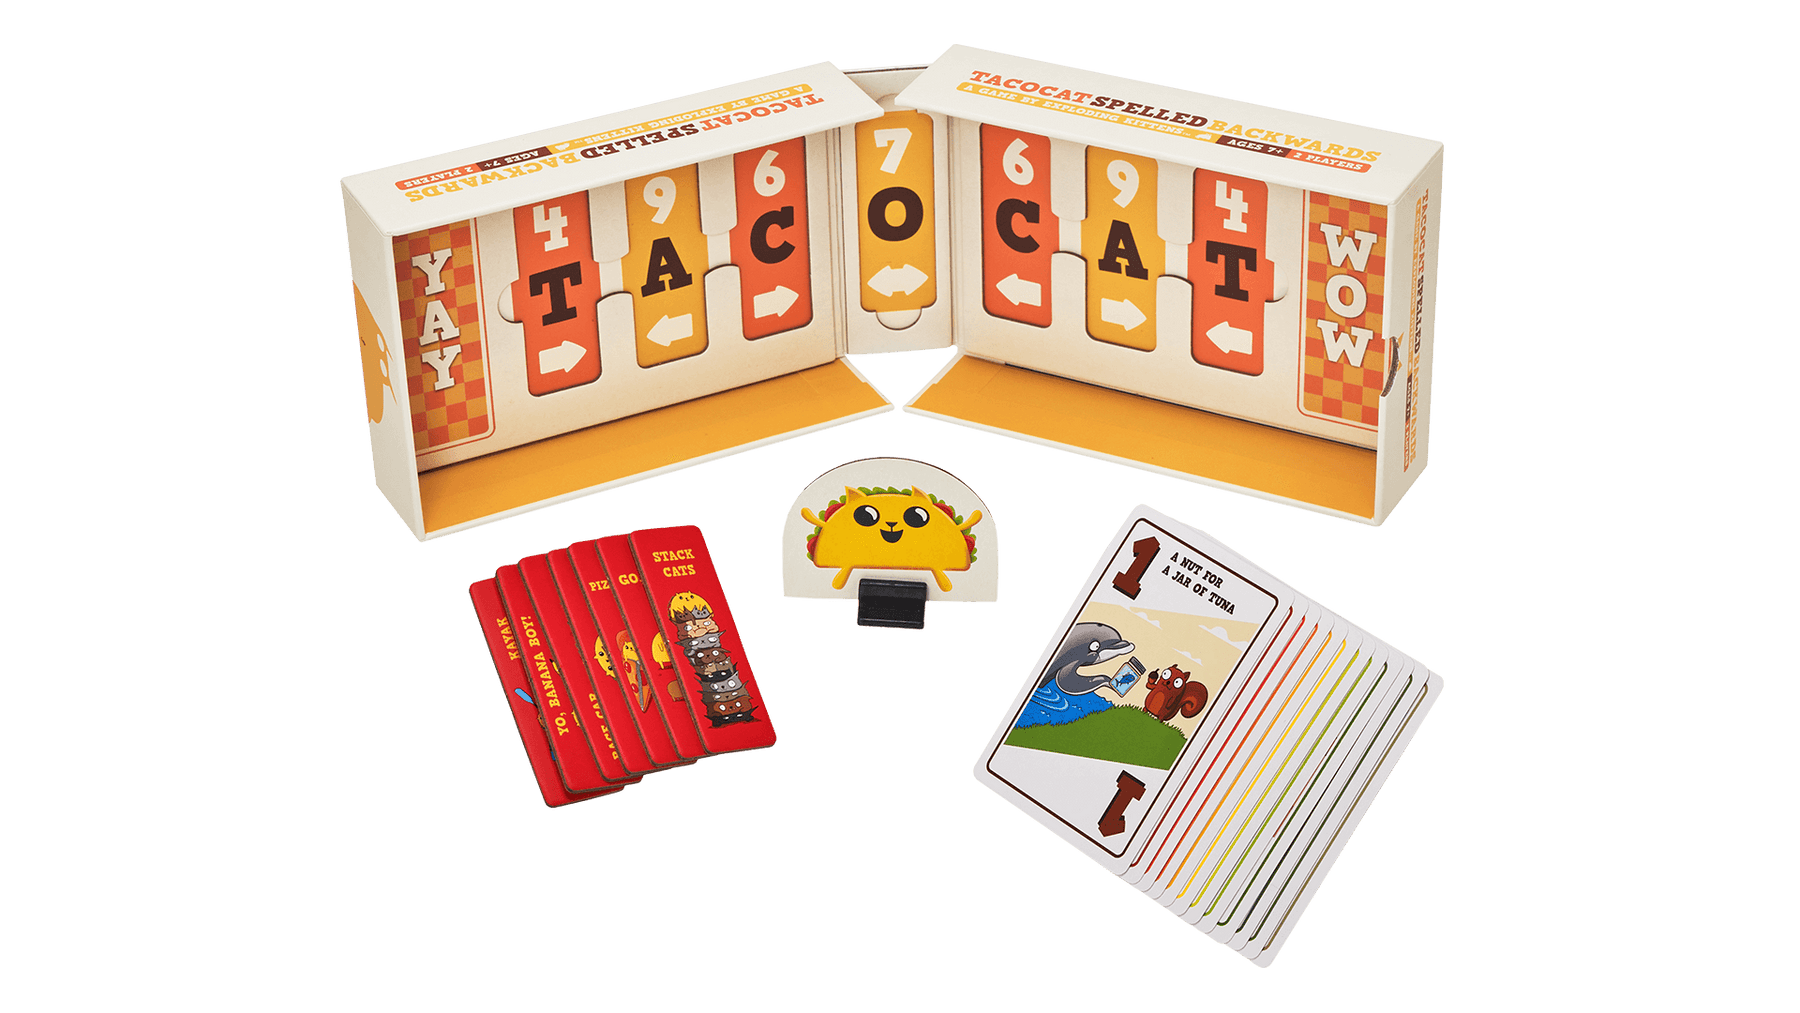 The next game from Exploding Kittens studio combines wordplay with